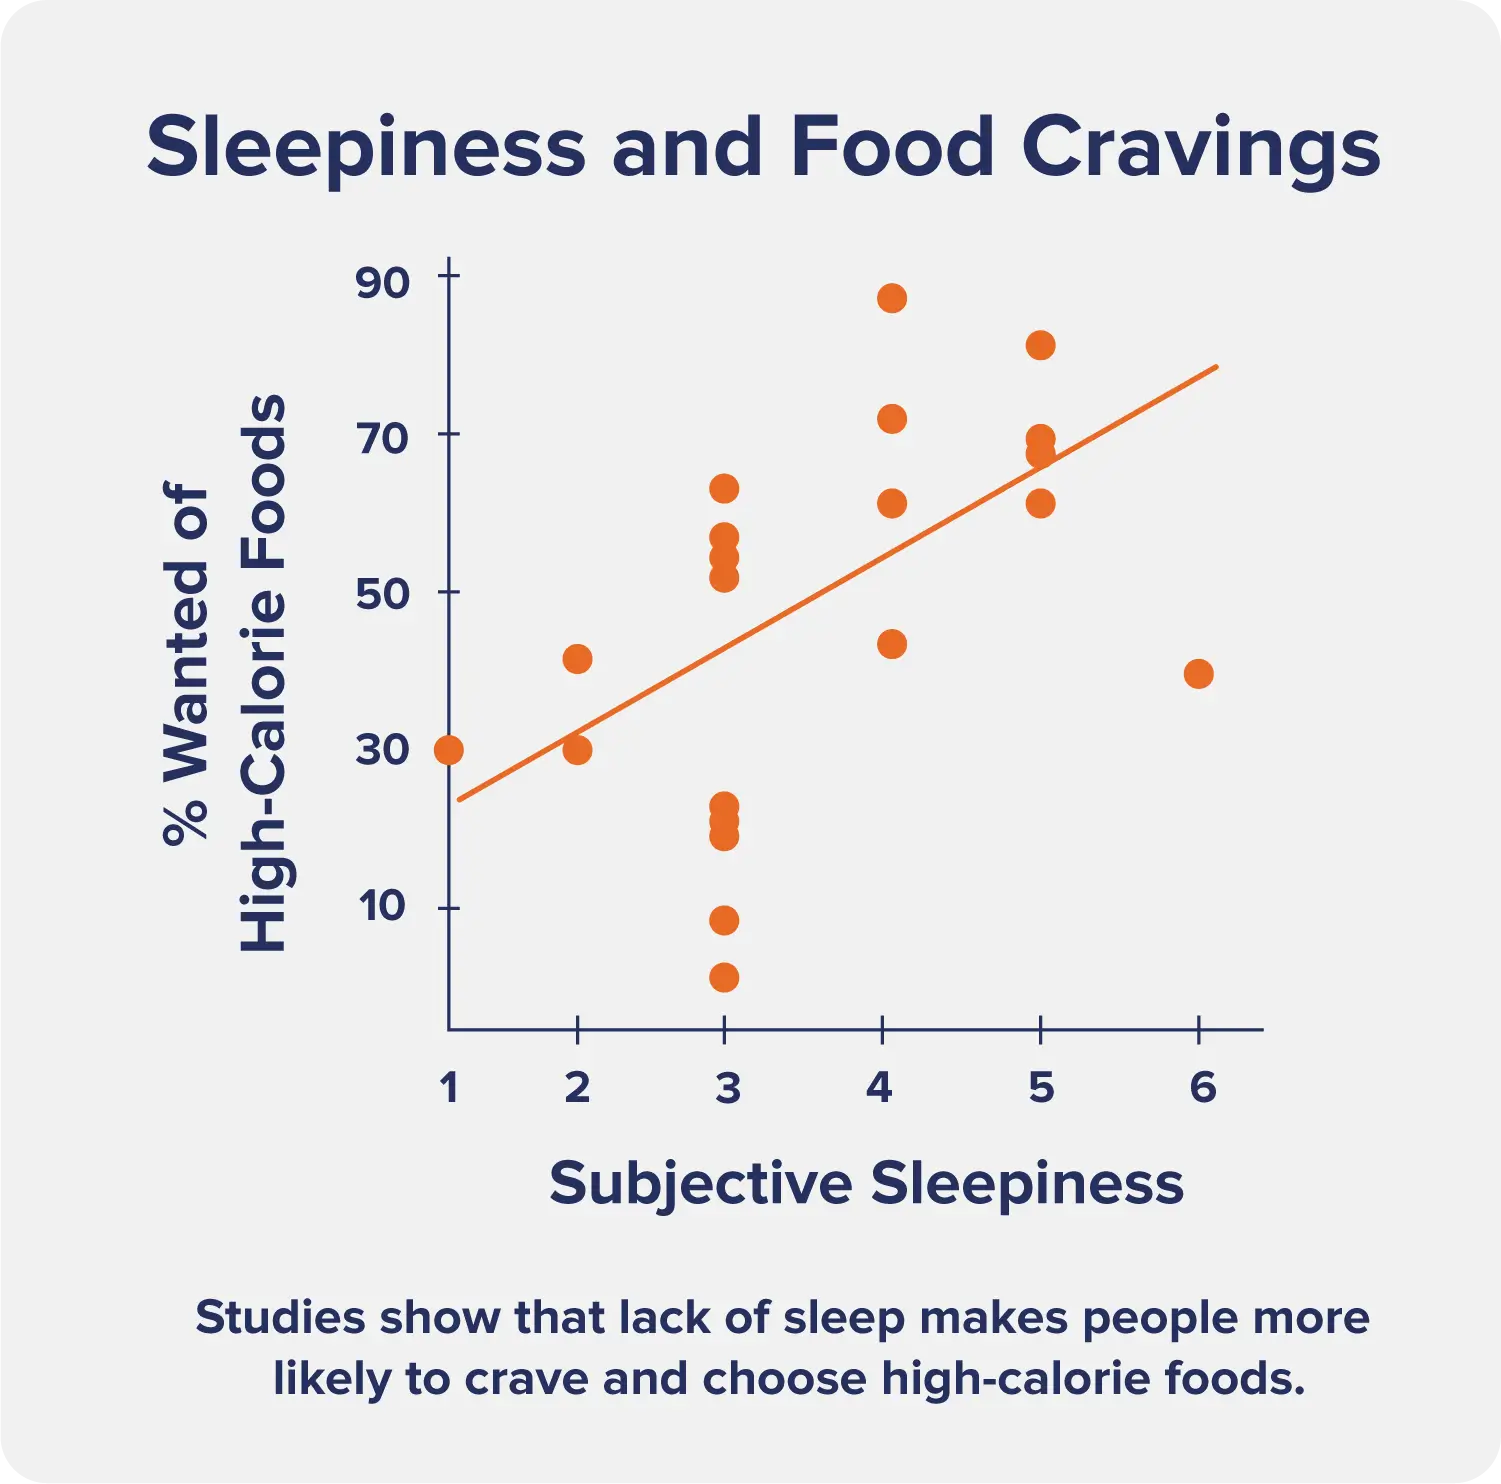 A graph titled "Sleepiness and Food Cravings," indicating an upward trend in desire for high-calorie foods as subjectively rated sleepiness level increases.